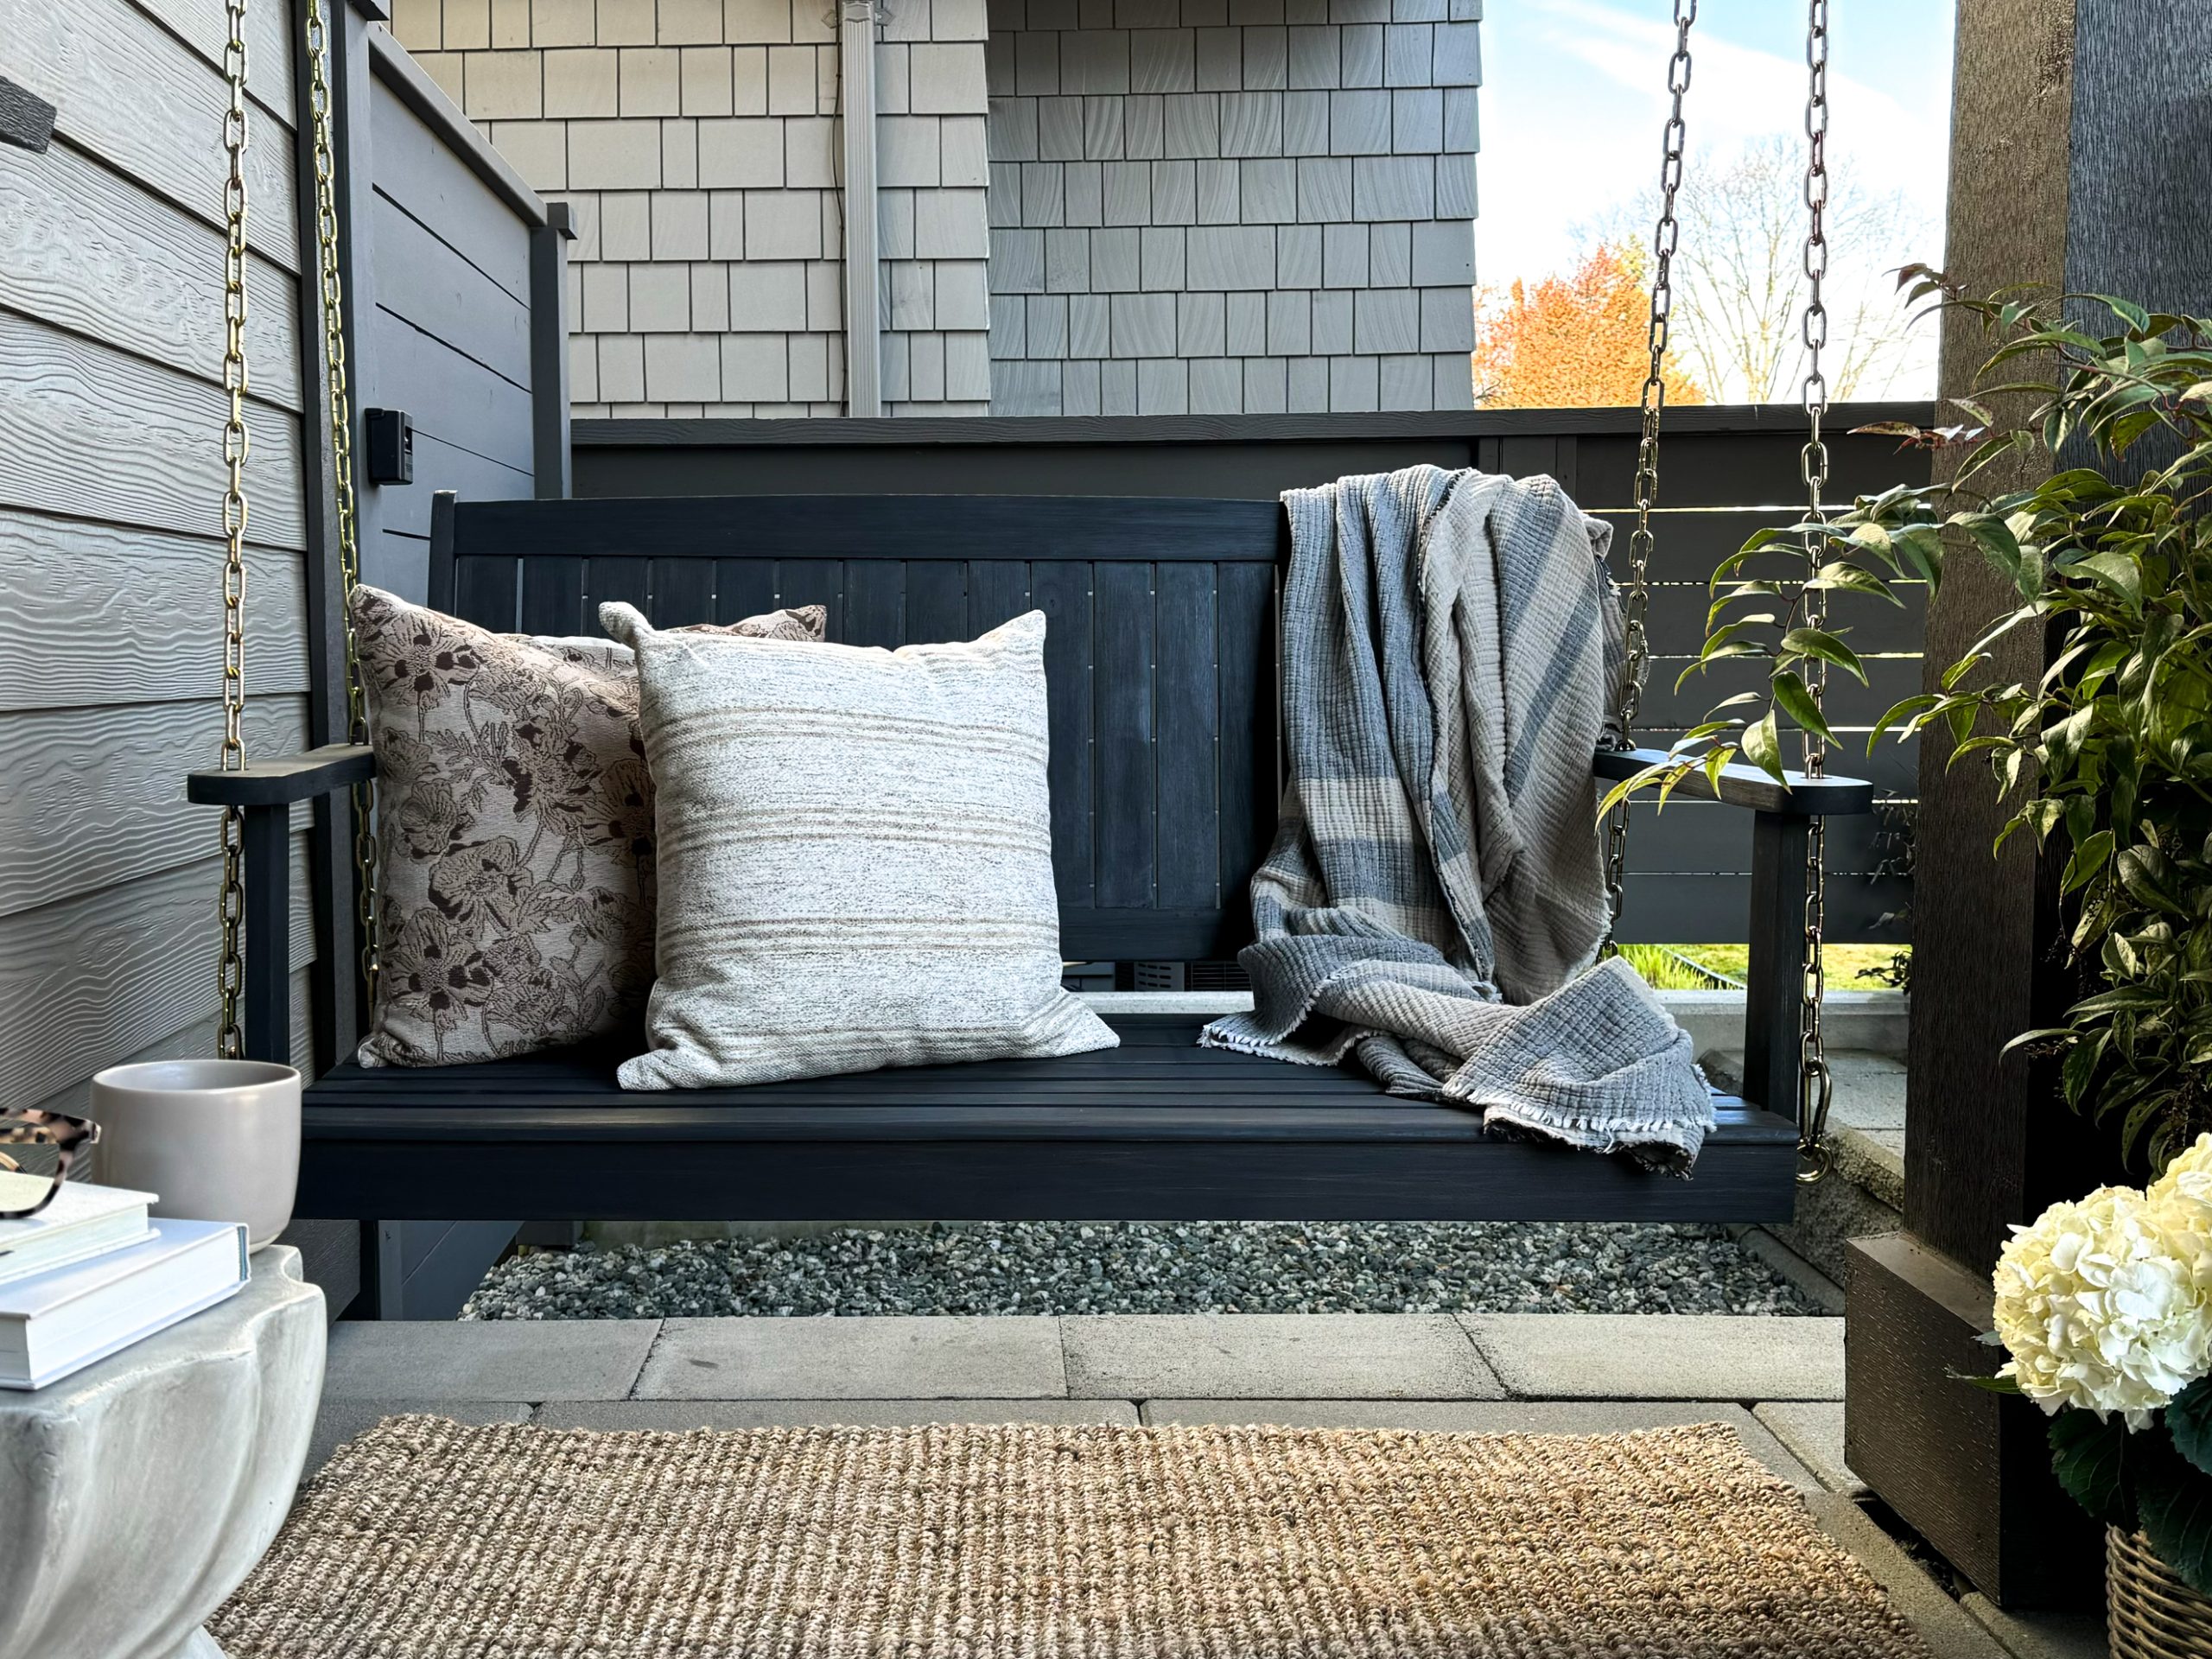 creating the perfect outdoor oasis with products from Wayfair Canada including a porch swing, cozy pillows, blankets, and affordable plant pots.